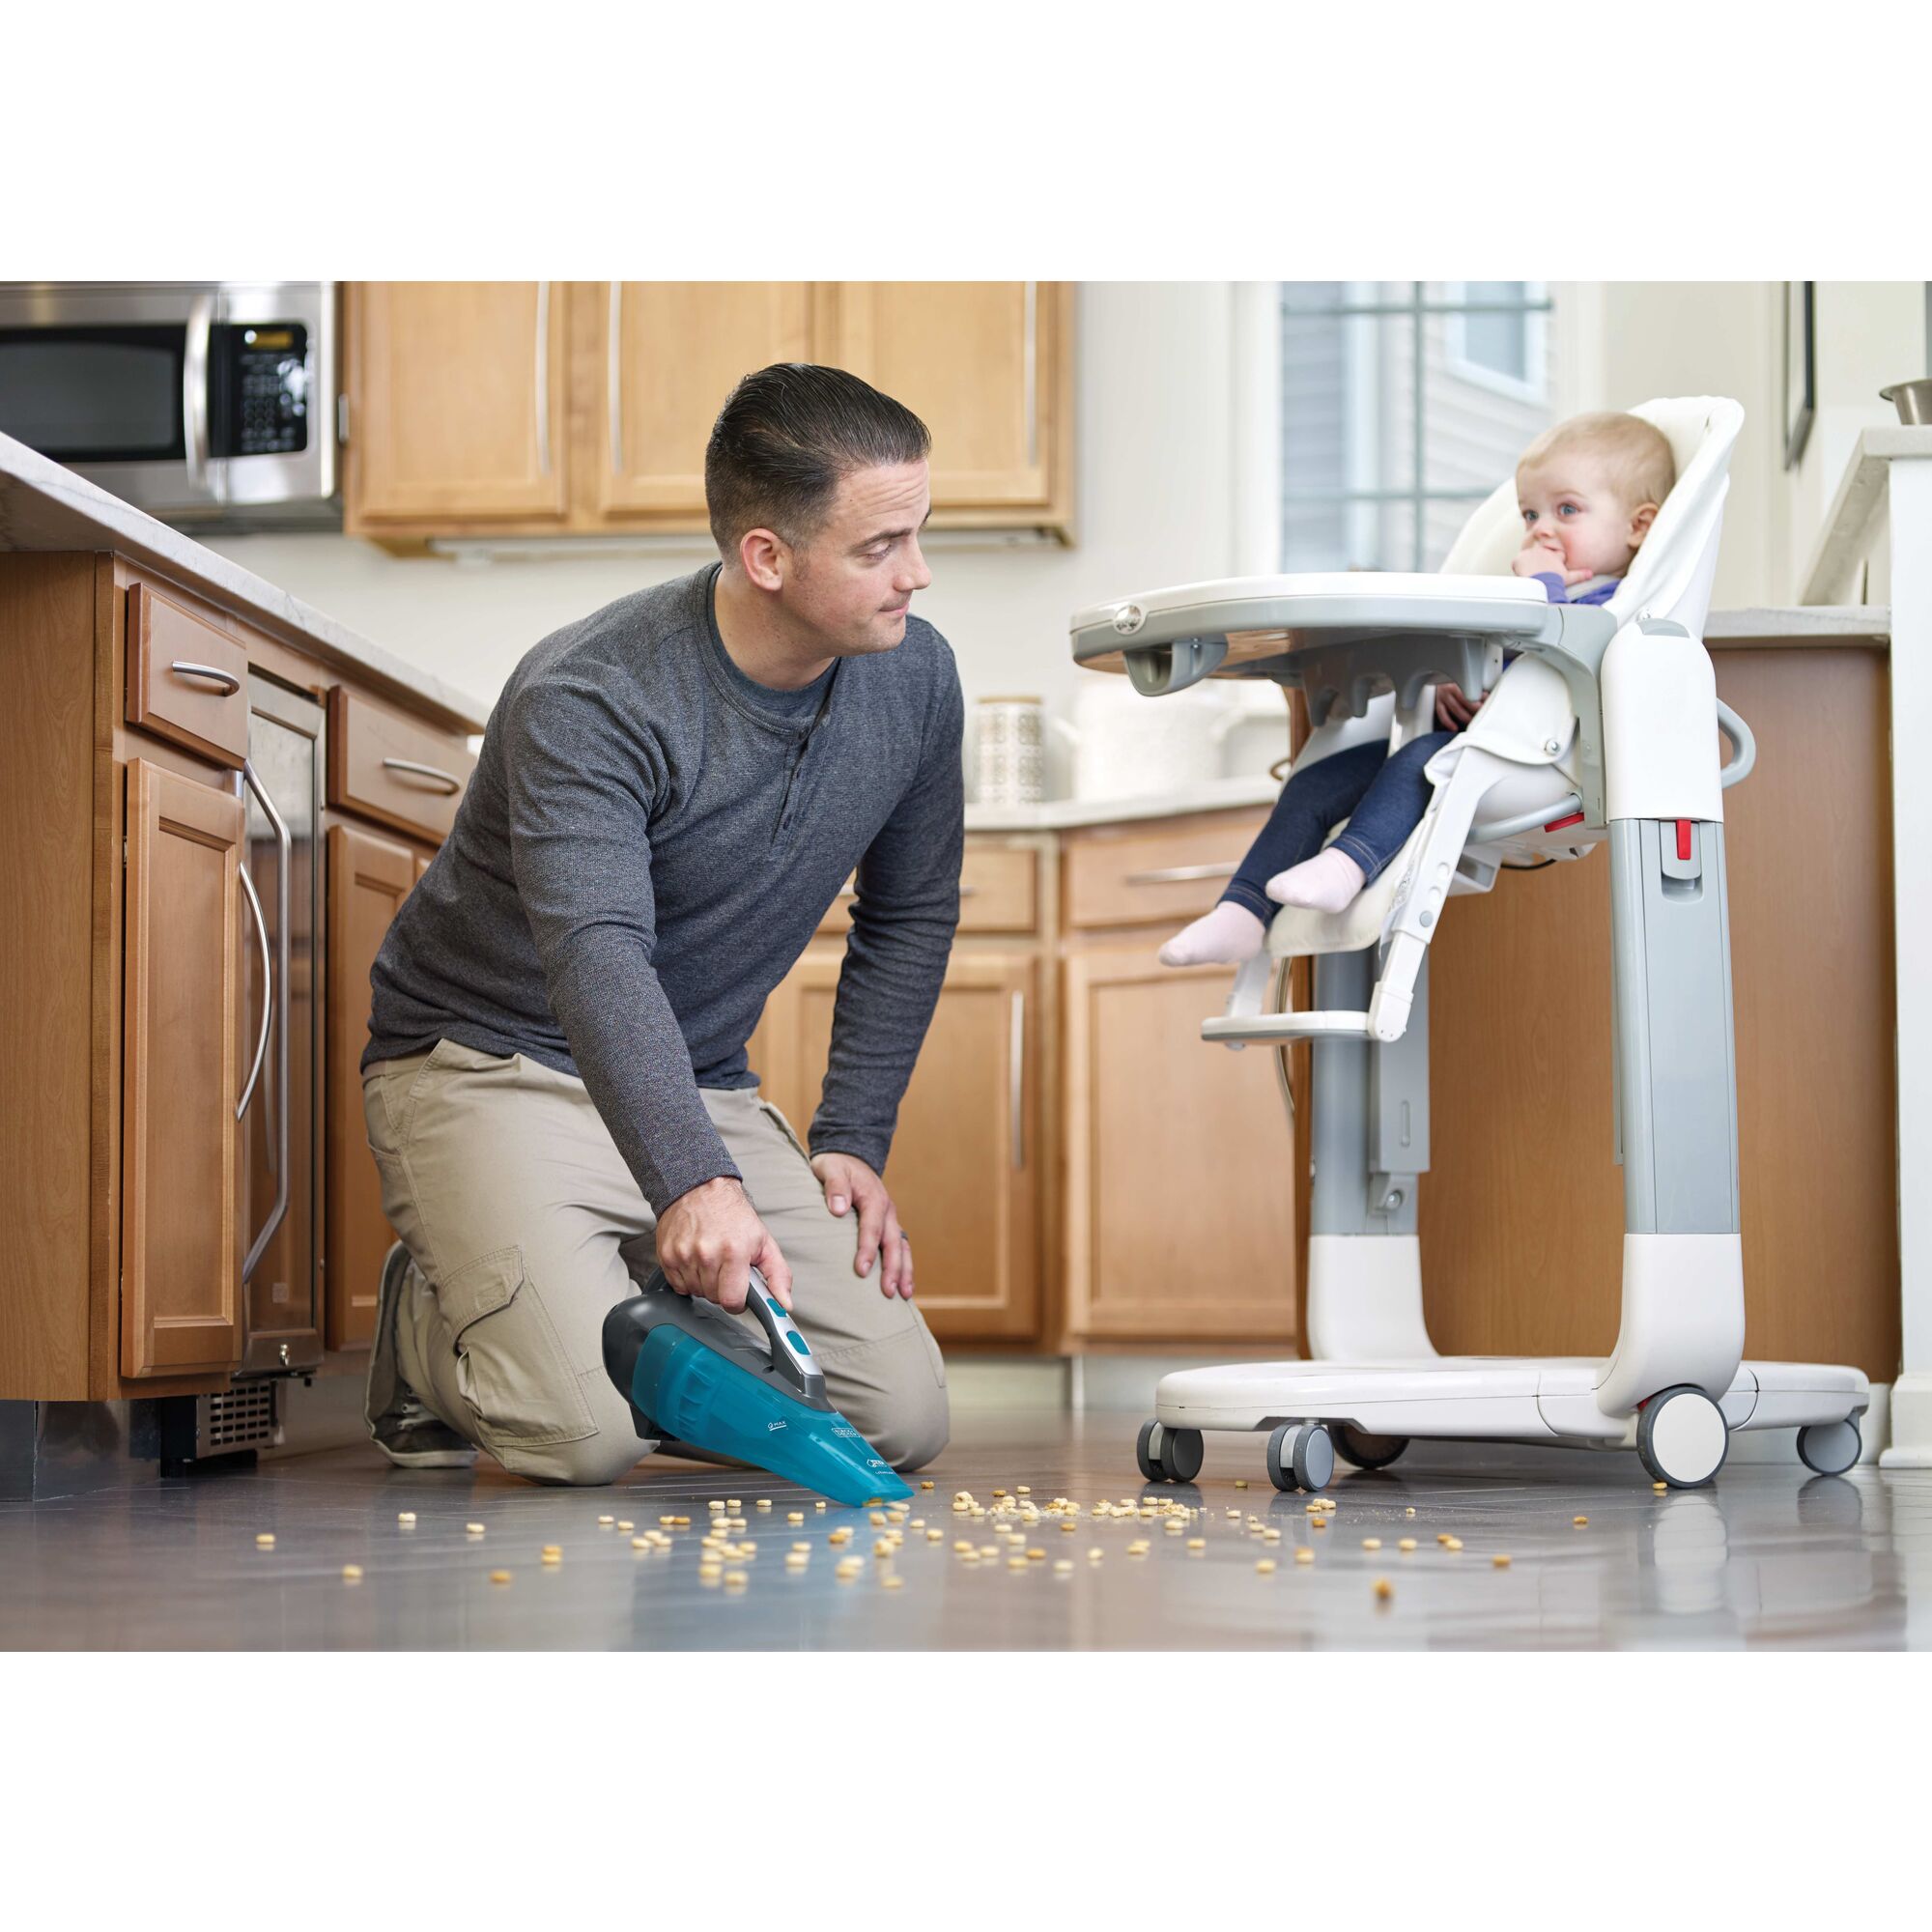 Dustbuster Advanced Clean Wet and Dry Cordless Hand Vacuum being used for cleaning spilled baby food from floor.